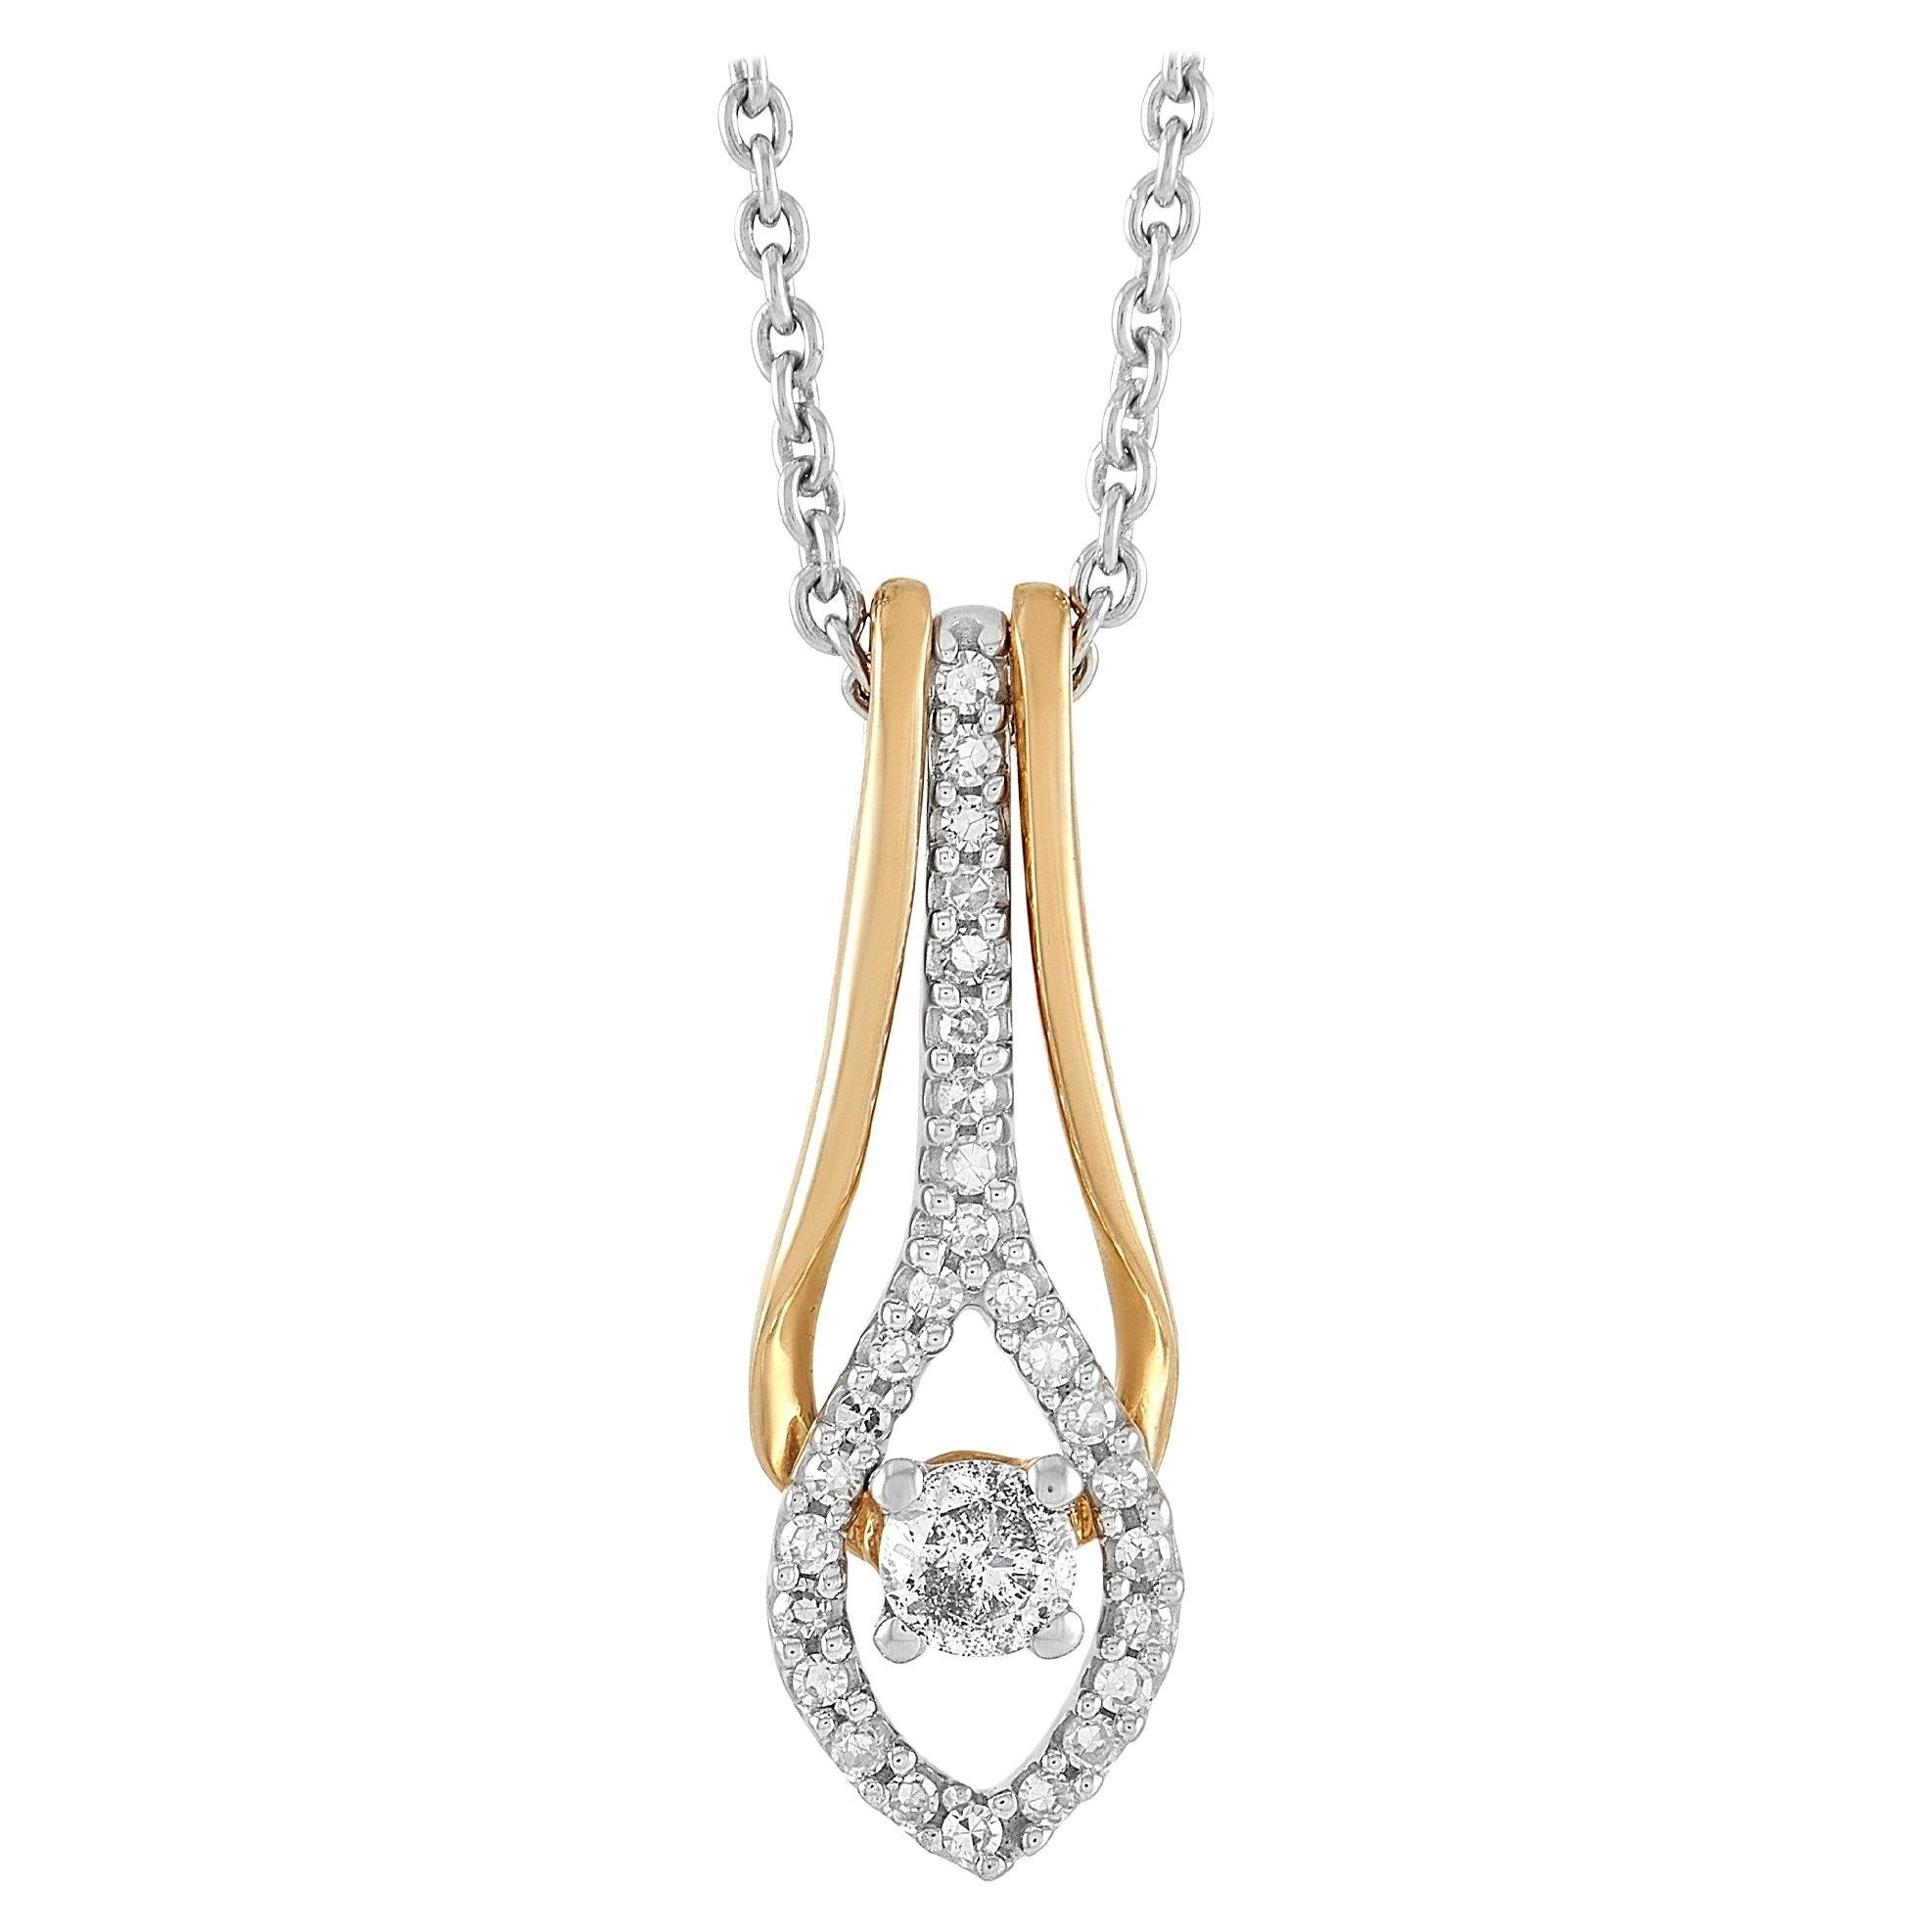 LB Exclusive 10k White and Yellow Gold 0.25 Ct Diamond Pendant Necklace For Sale